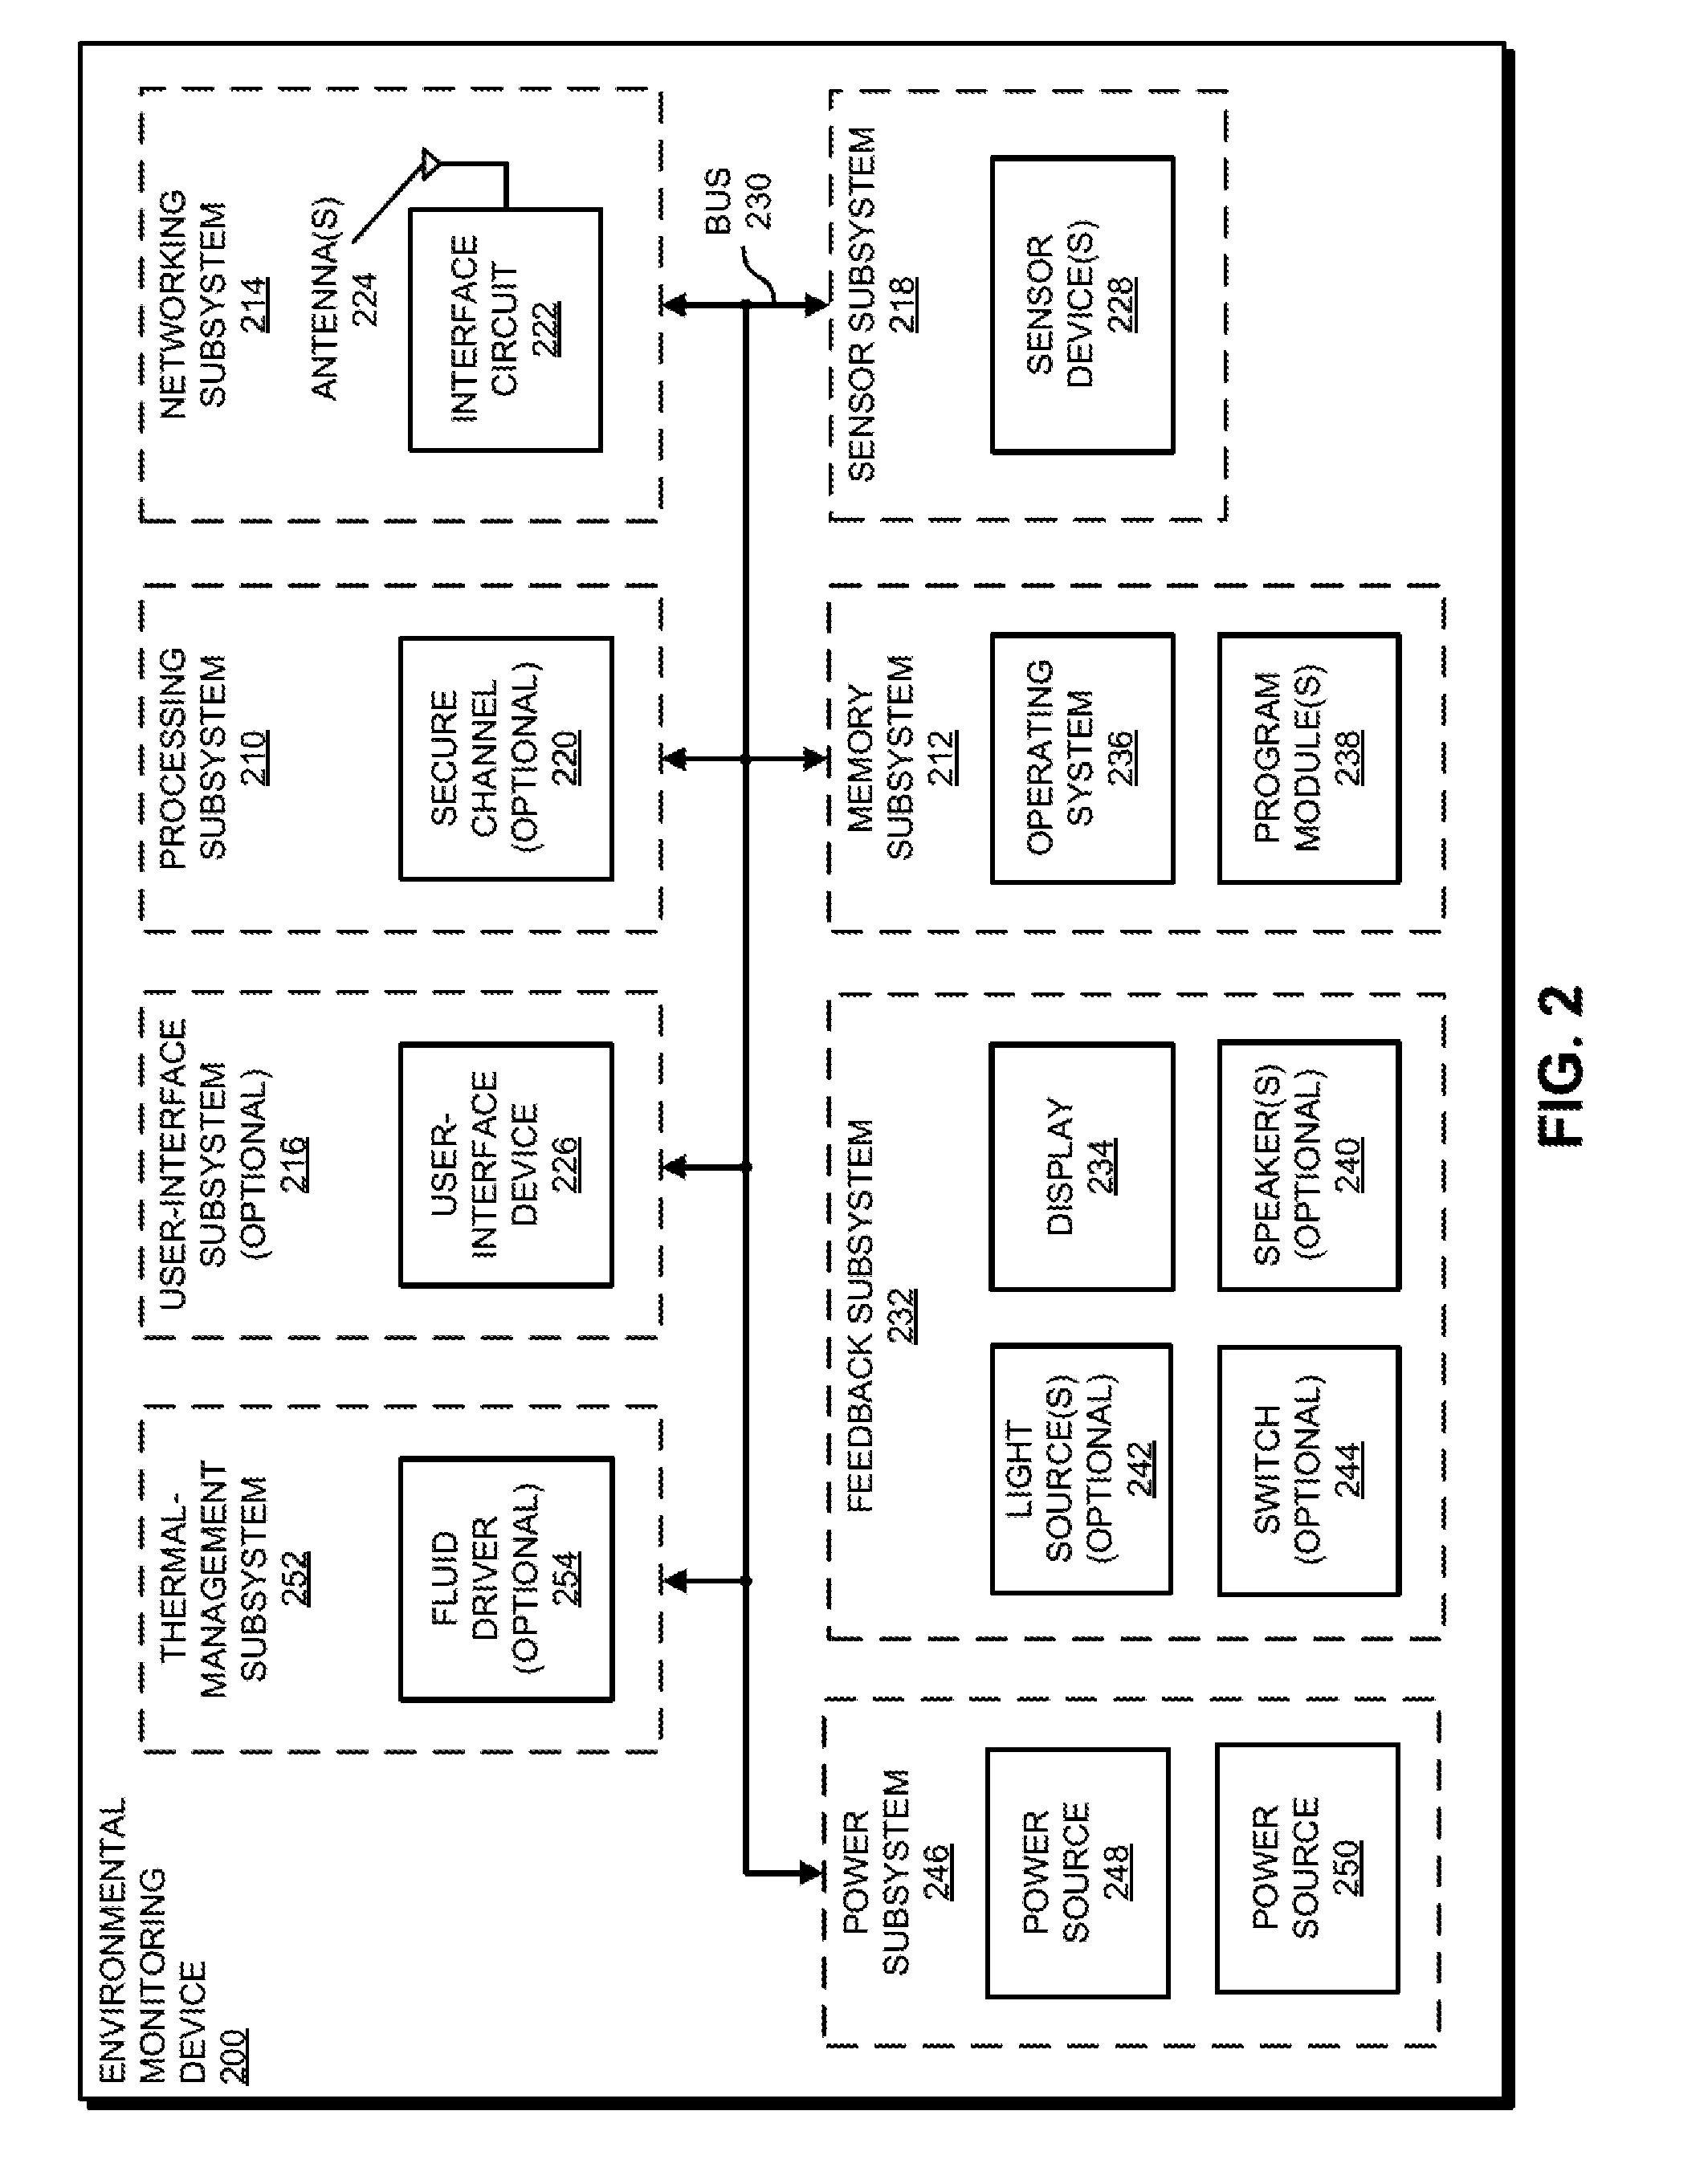 Electronic device with environmental monitoring